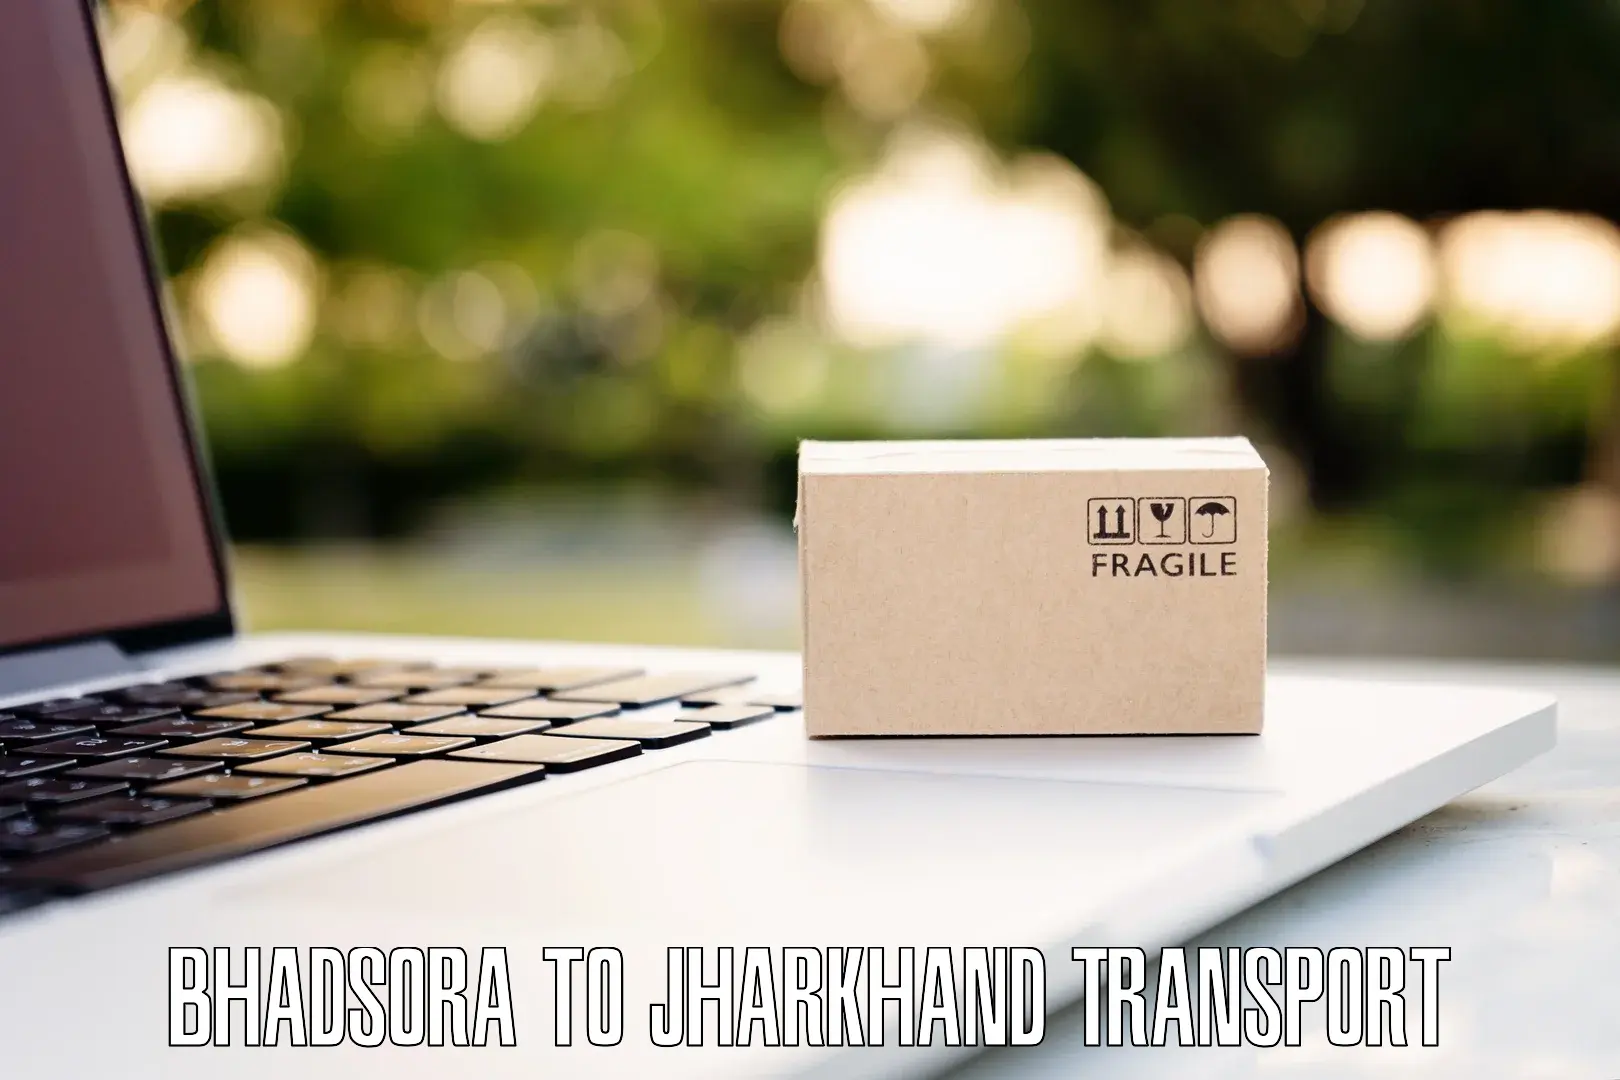 Online transport booking Bhadsora to Birla Institute of Technology Ranchi